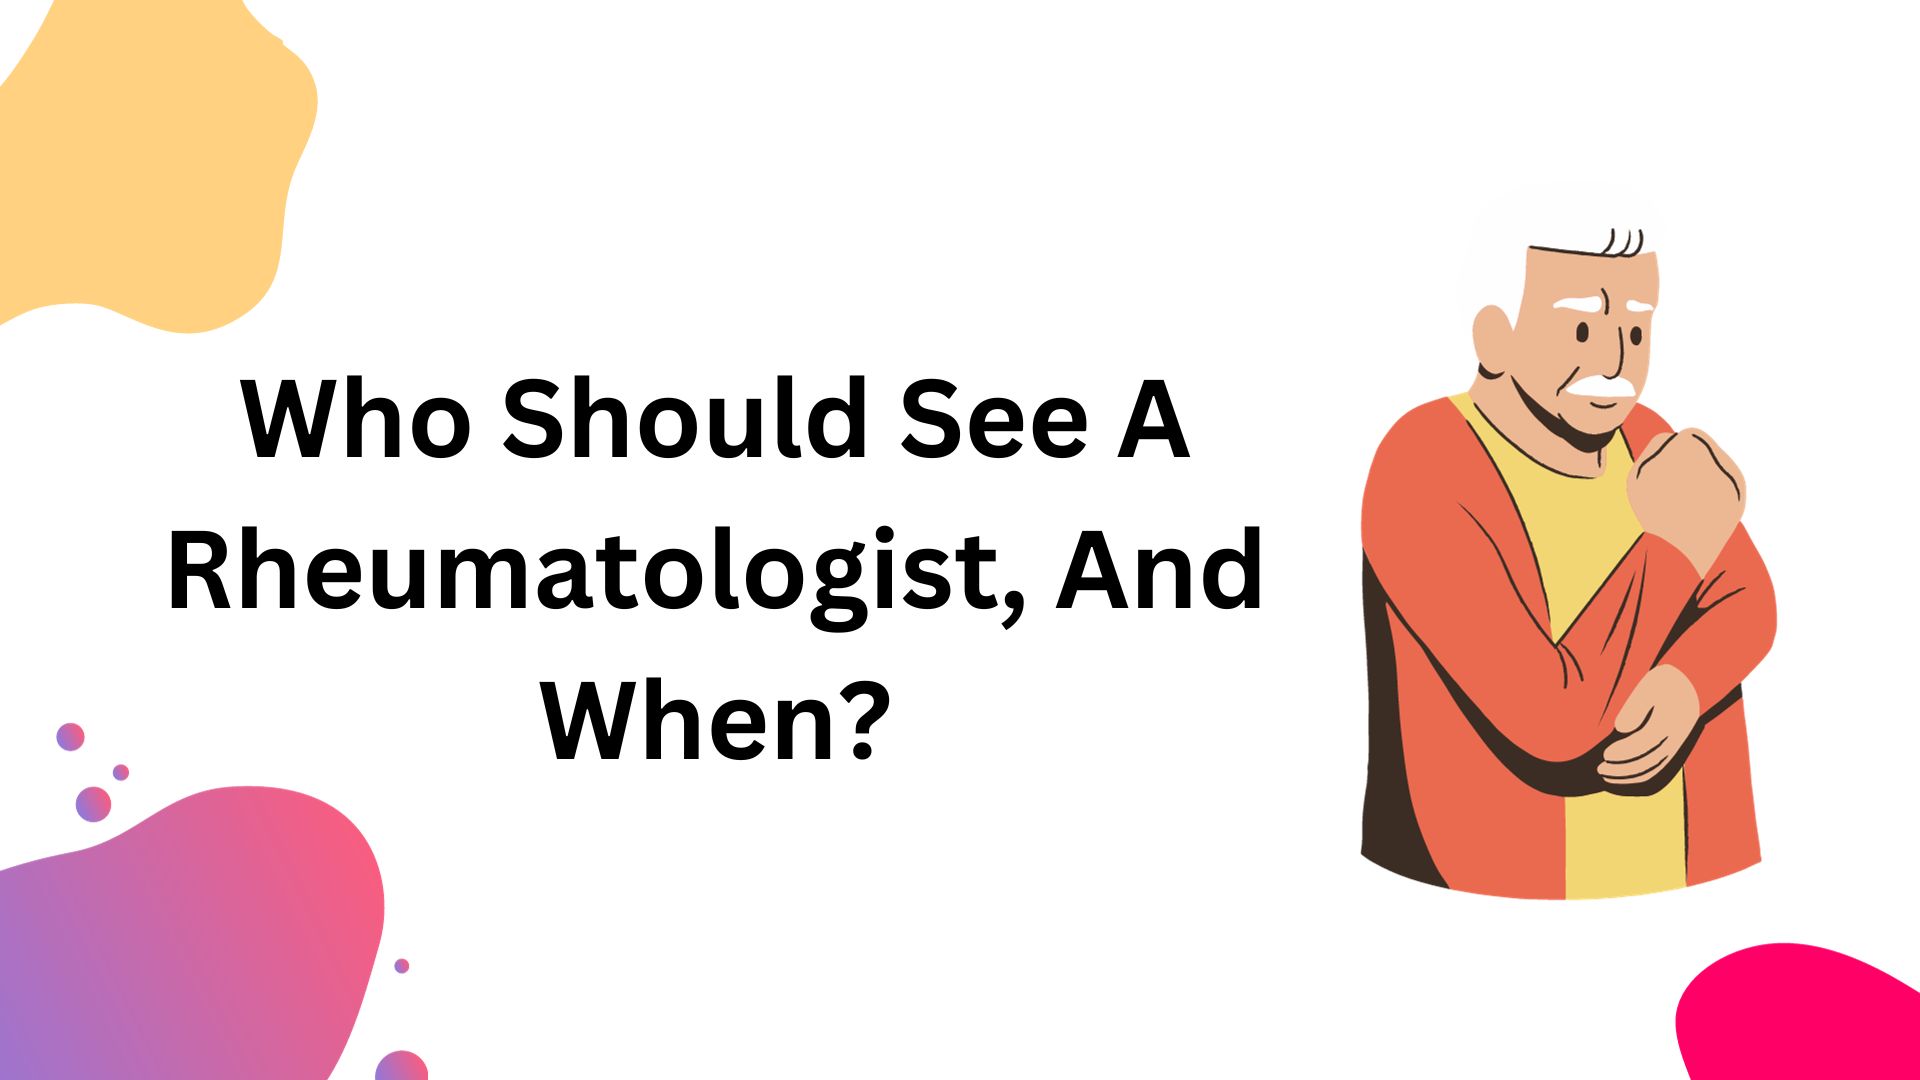 Who Should See A Rheumatologist, And When?